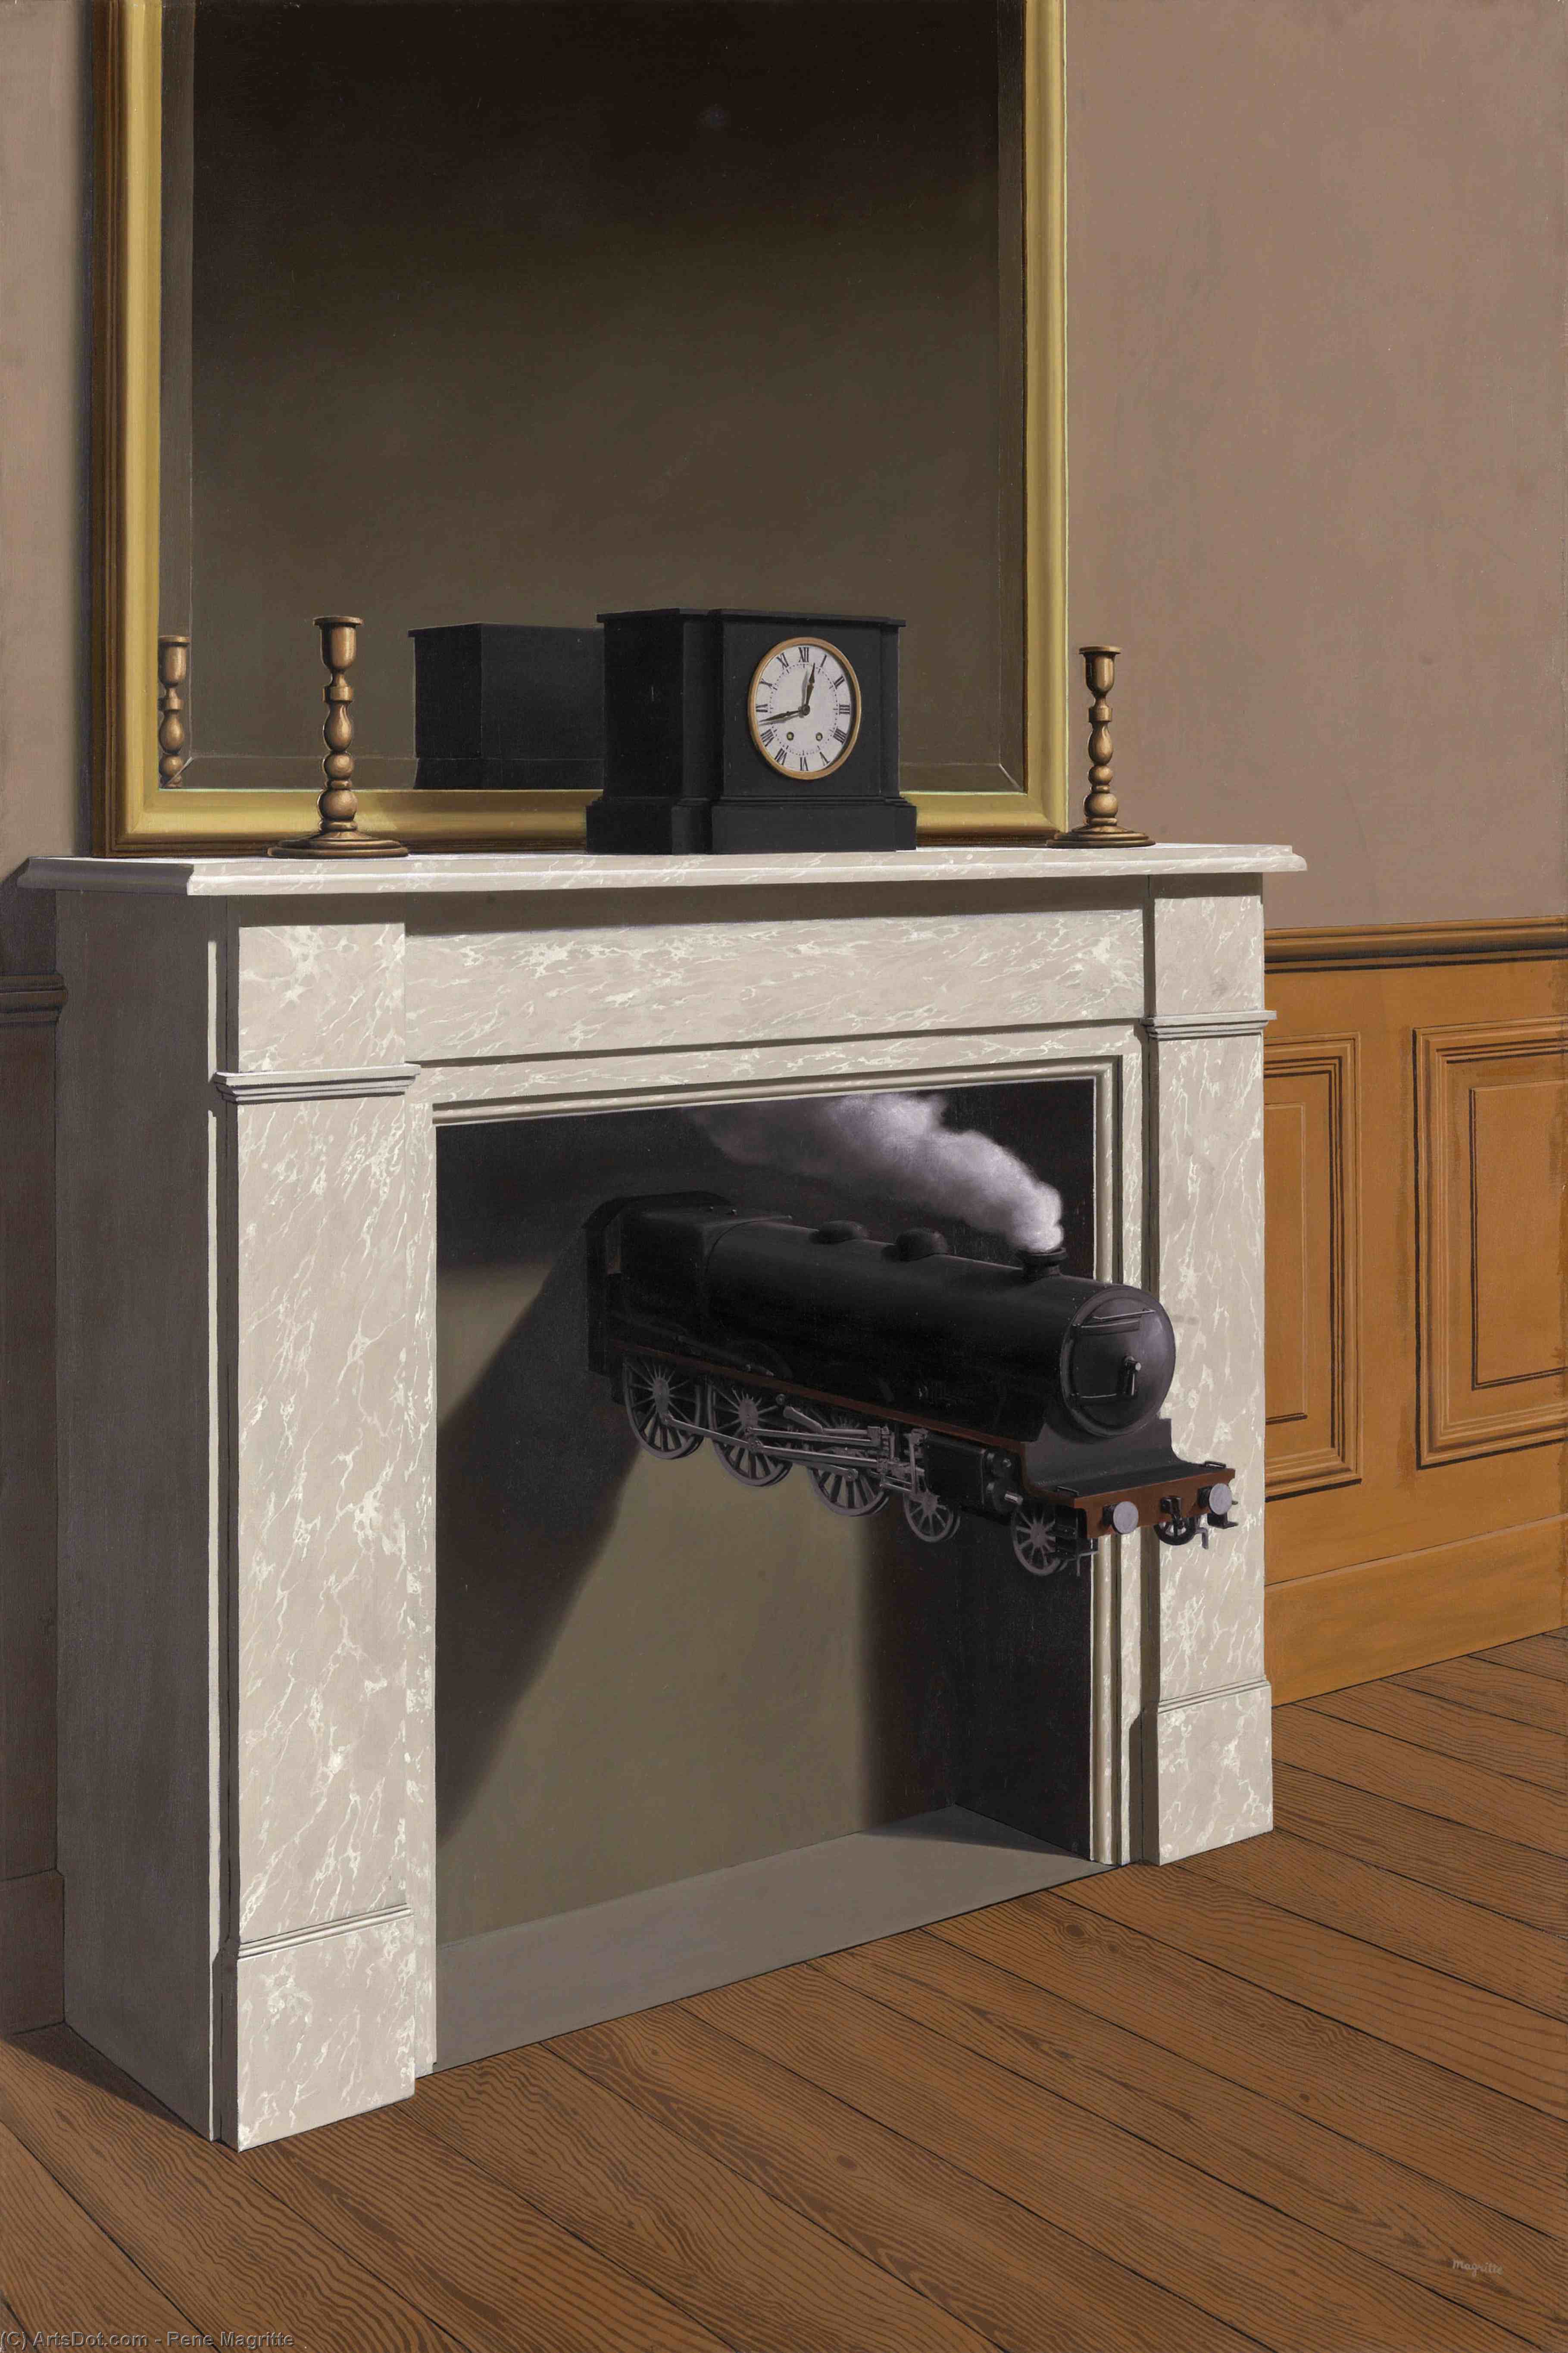 WikiOO.org - 백과 사전 - 회화, 삽화 Rene Magritte - Time transfixed